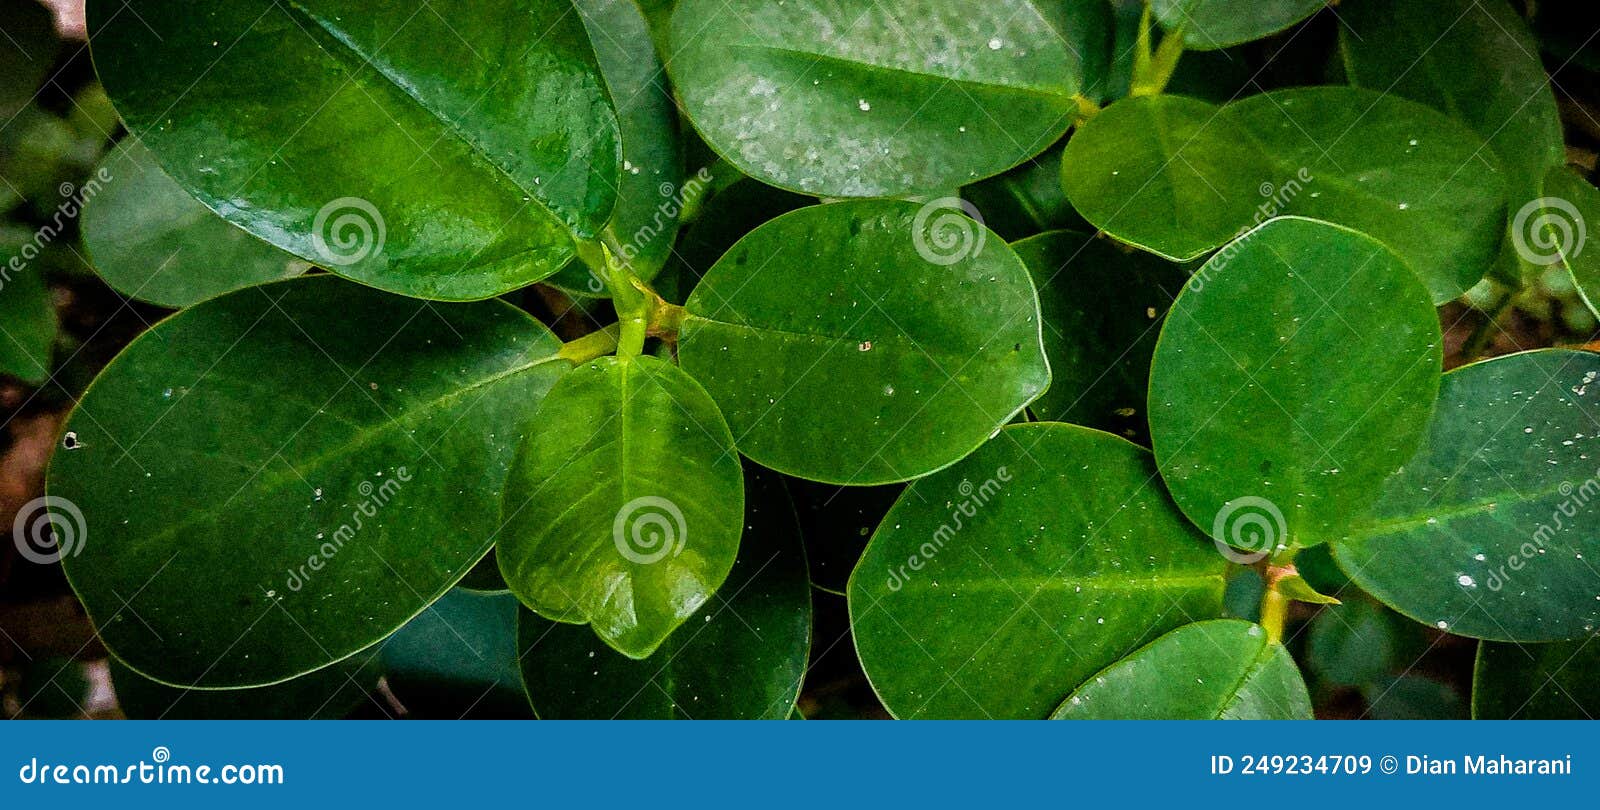 fresh and calming look of green elipse or oval d leaves of ficus malacocarpa